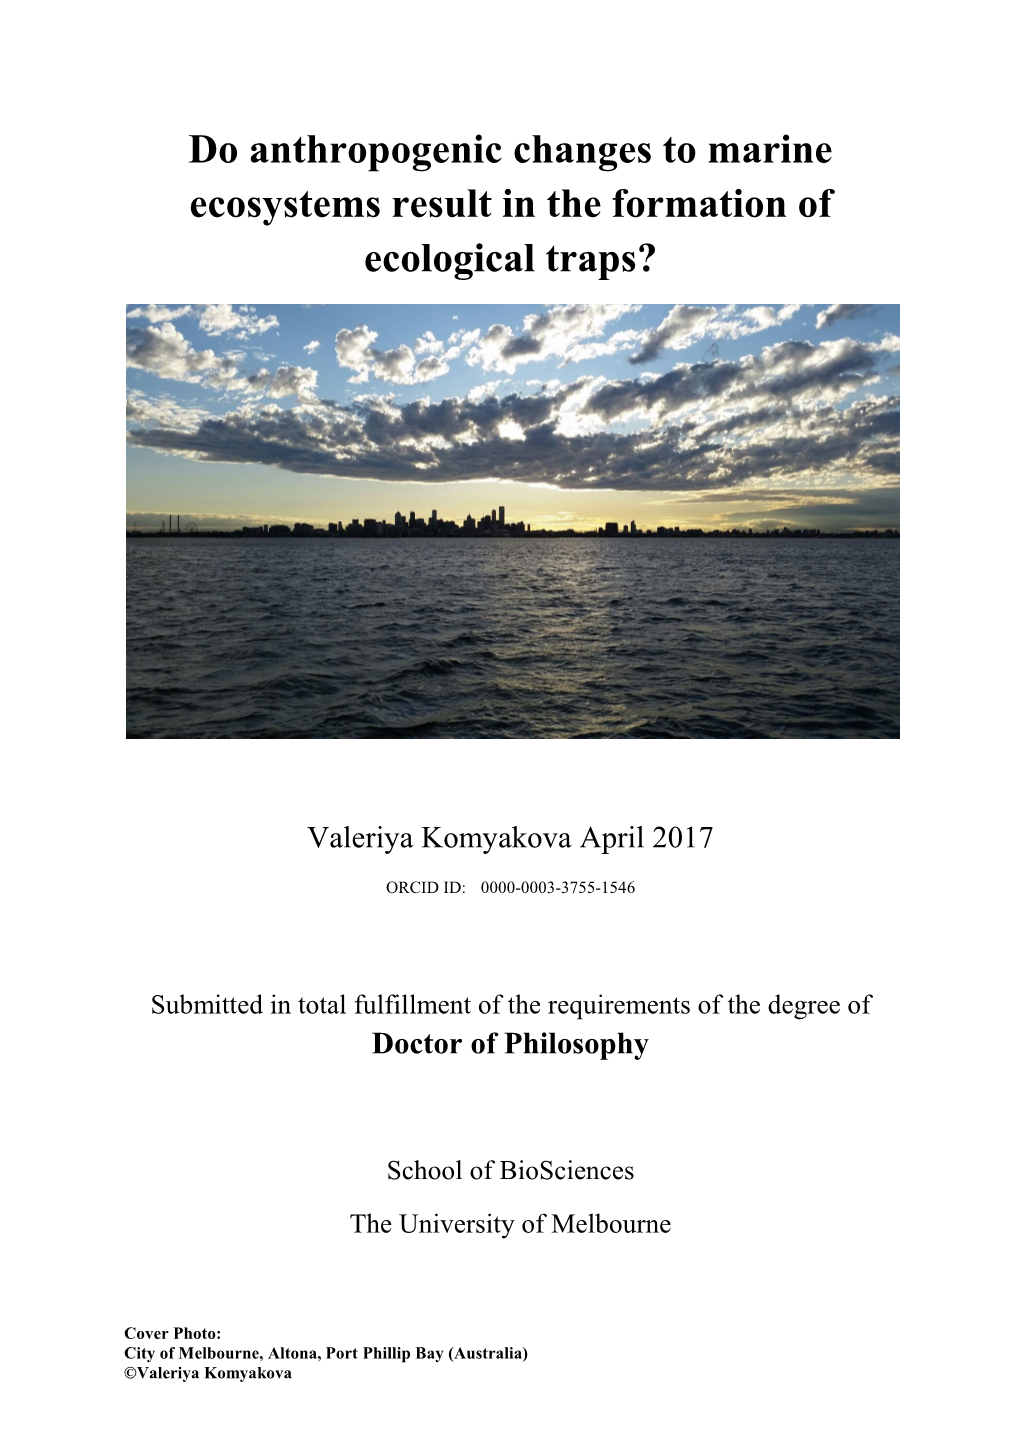 Do Anthropogenic Changes to Marine Ecosystems Result in the Formation of Ecological Traps?